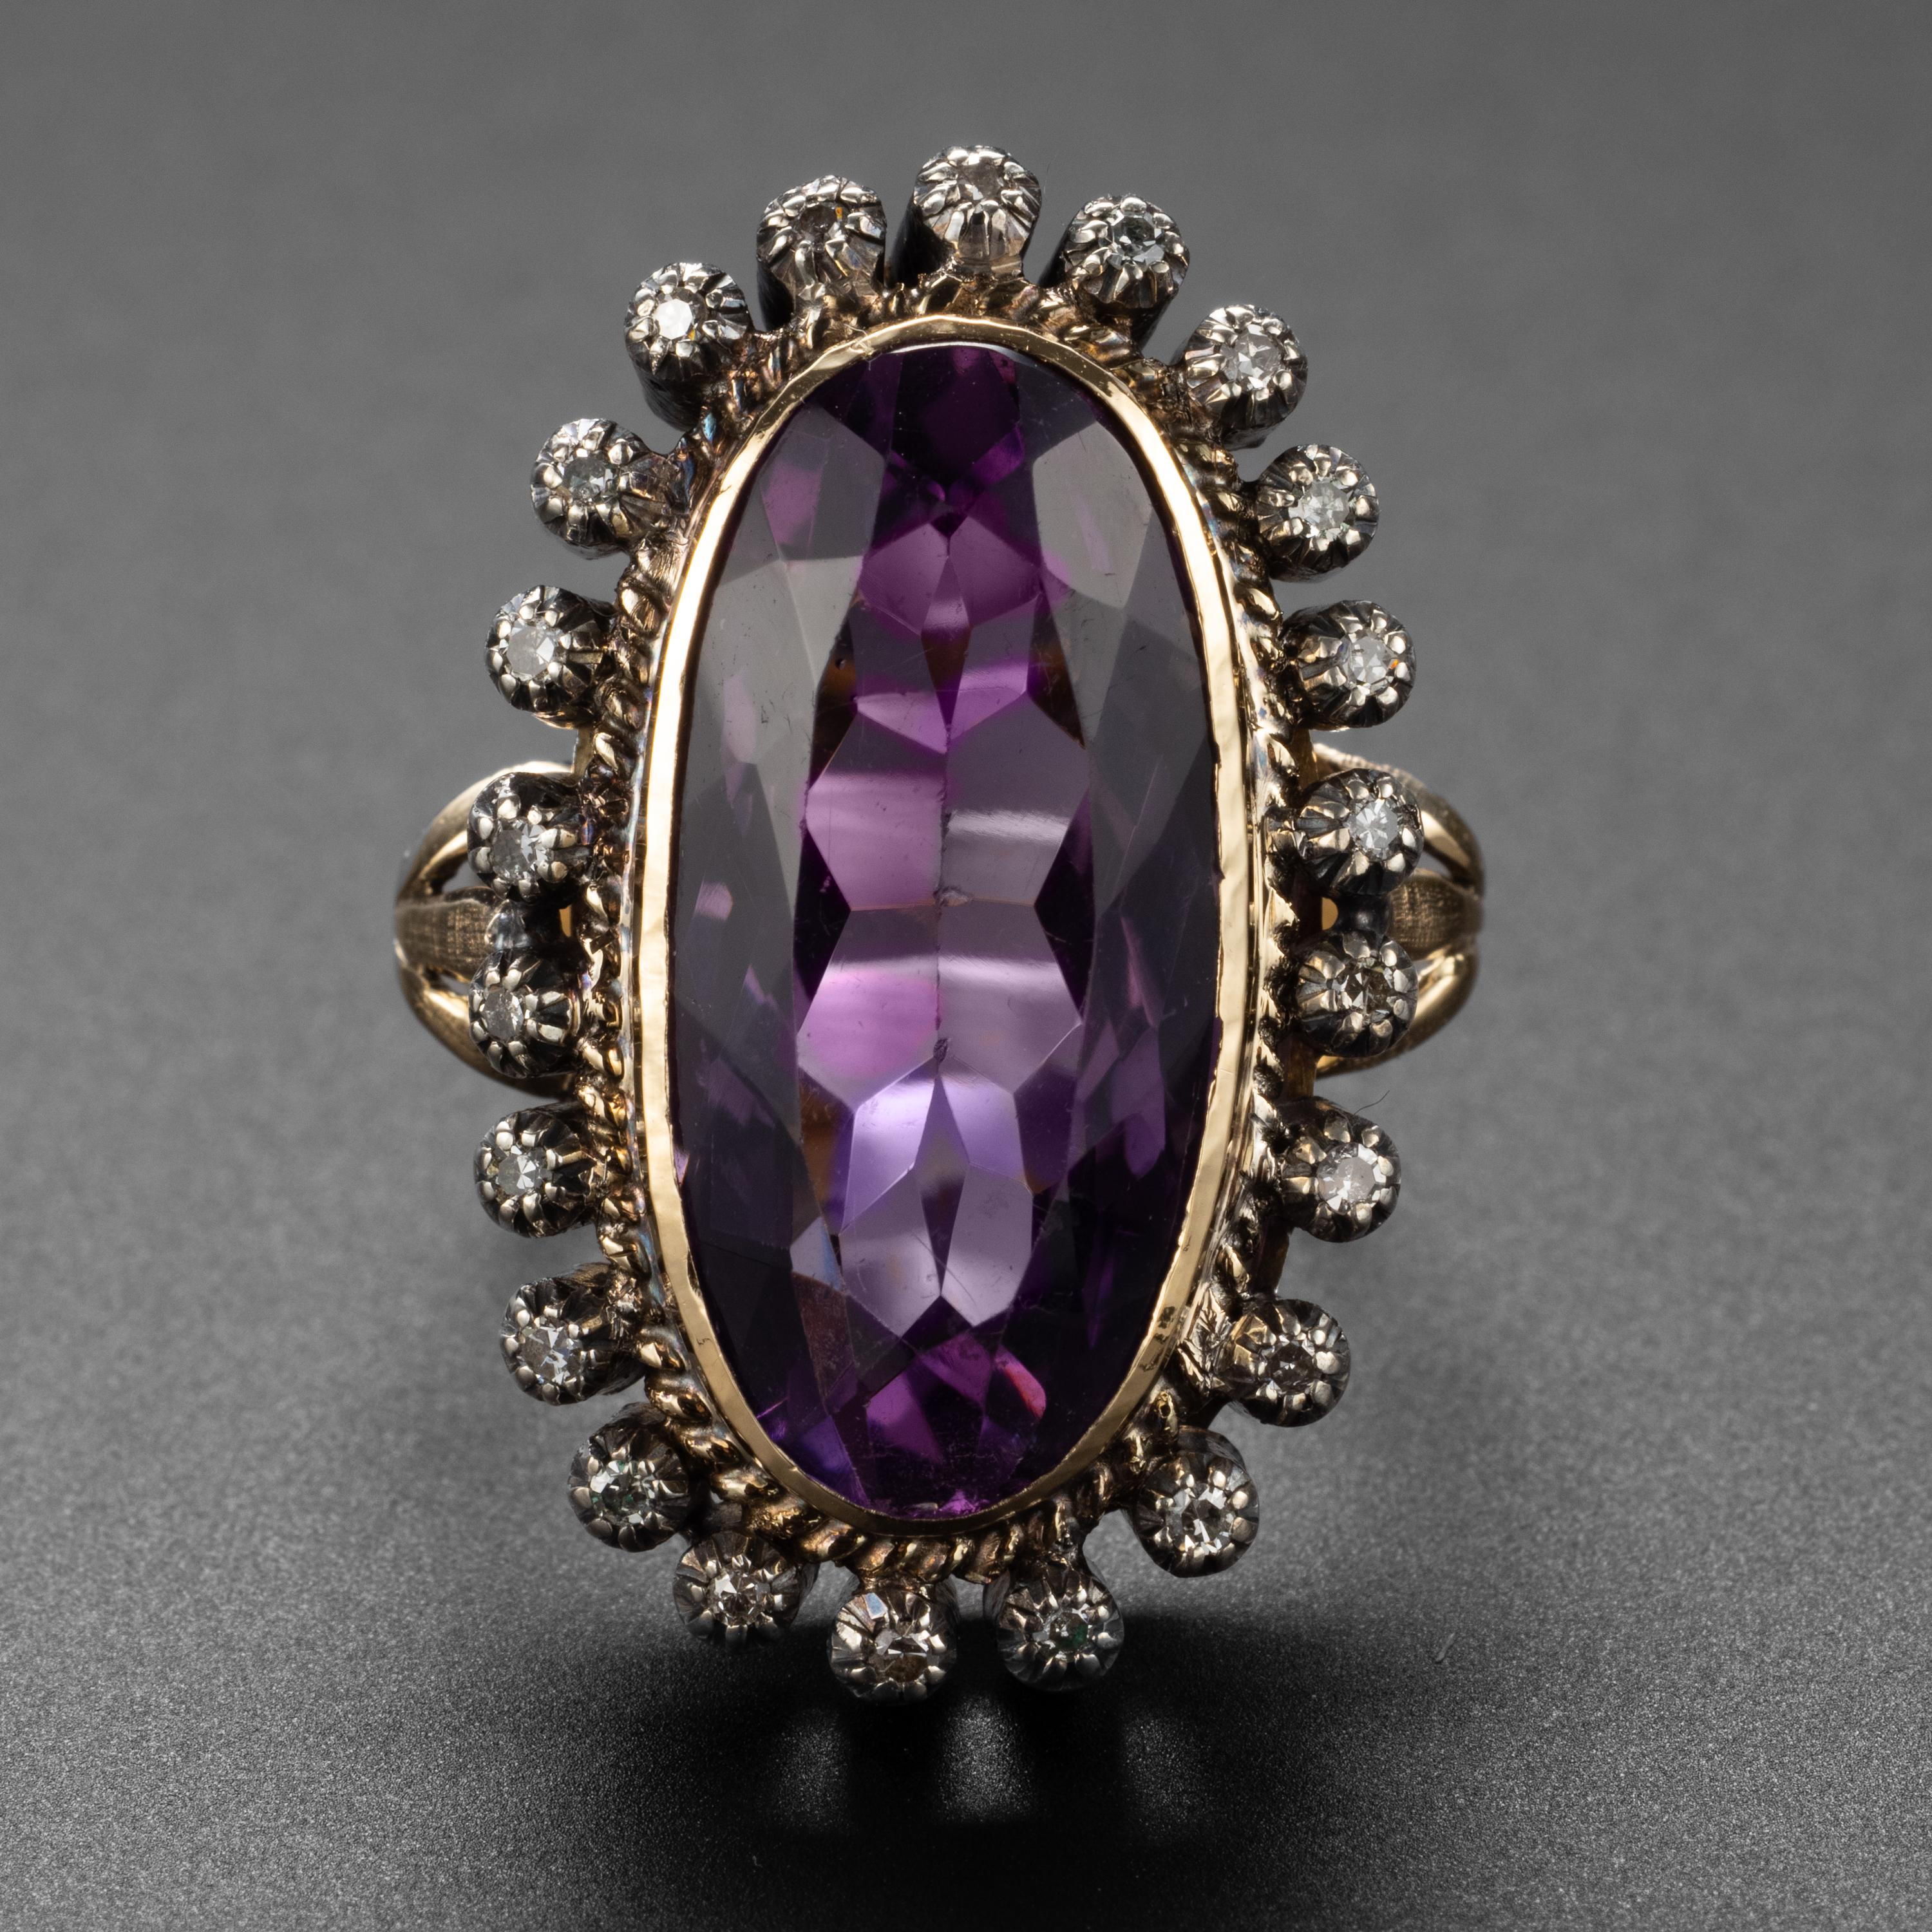 This circa 1890s ring features an impressive oblong oval-shaped 11 carat amethyst with excellent purple and rose coloring. The 23.63mm x 11.33mm is surrounded by a halo of 22 tiny European-cut diamonds, each set into its own silver collet. Together